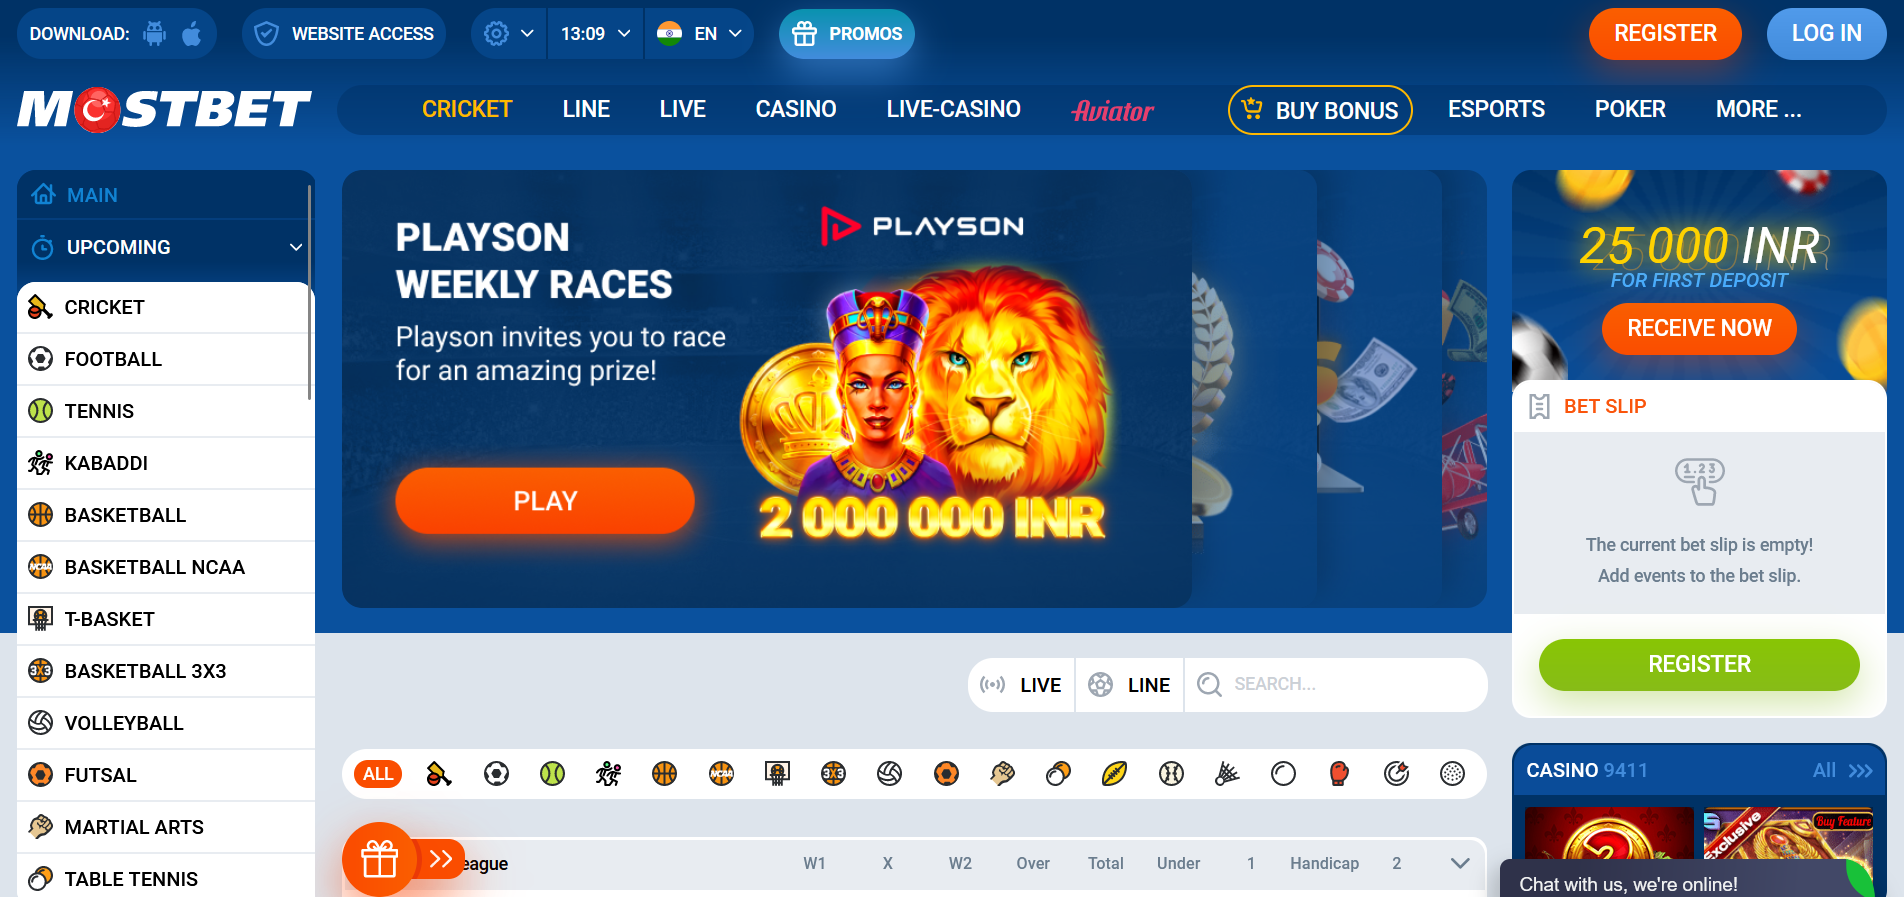 How To Find The Time To Exciting online casino Mostbet in Turkey On Facebook